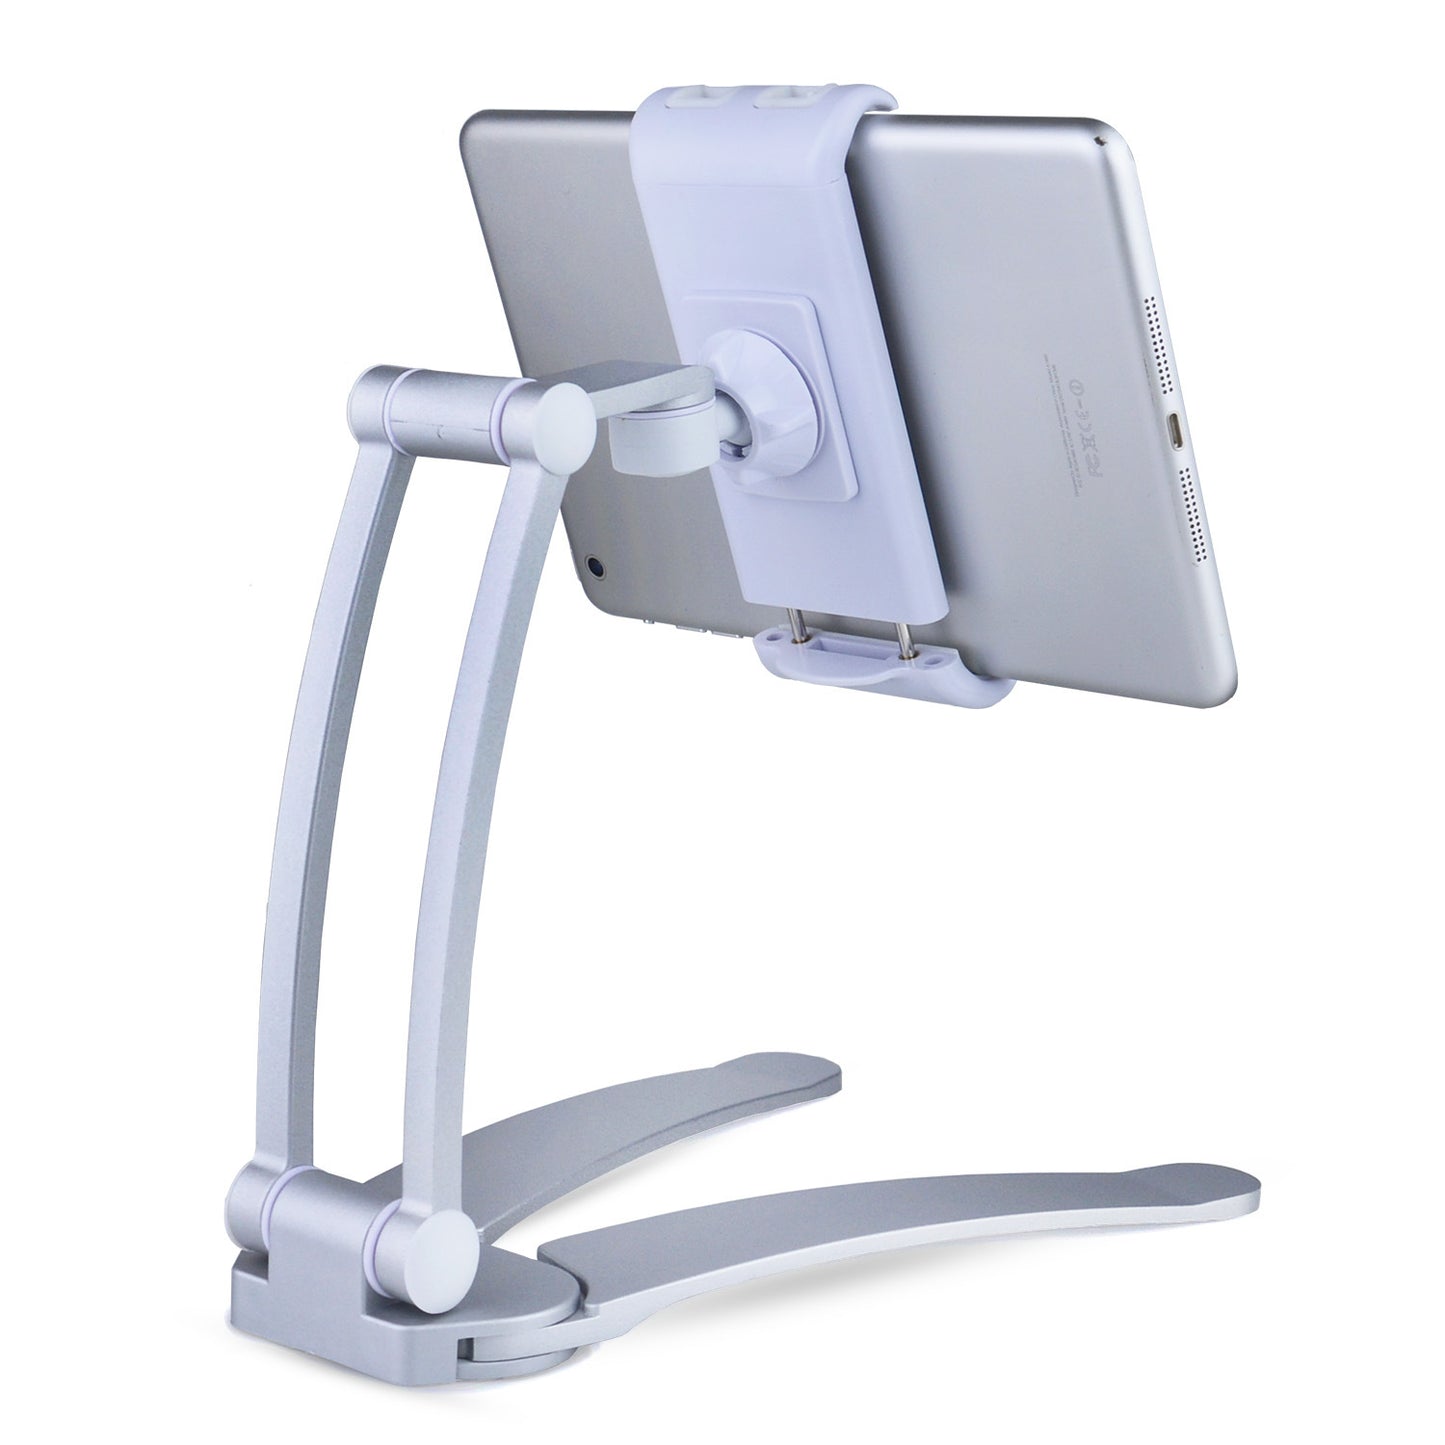 Desktop Mobile Phone Stand Folding Tablet Stand Lazy Bedside Stand Live Broadcast Stand Multifunctional Wall Stand